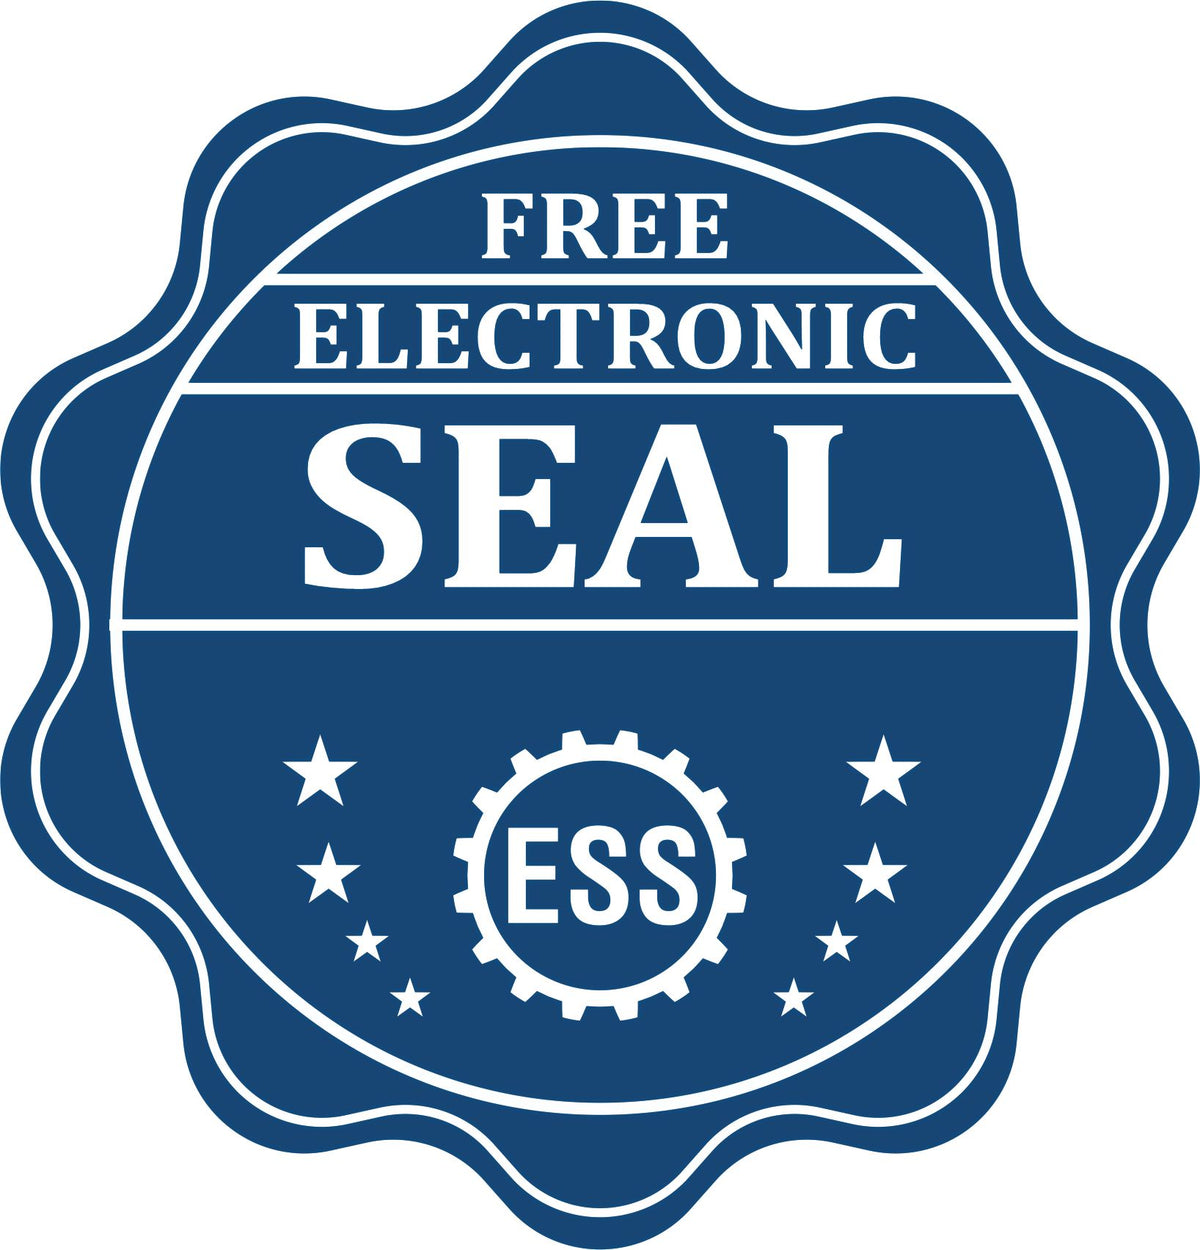 A badge showing a free electronic seal for the Slim Pre-Inked Indiana Professional Geologist Seal Stamp with stars and the ESS gear on the emblem.